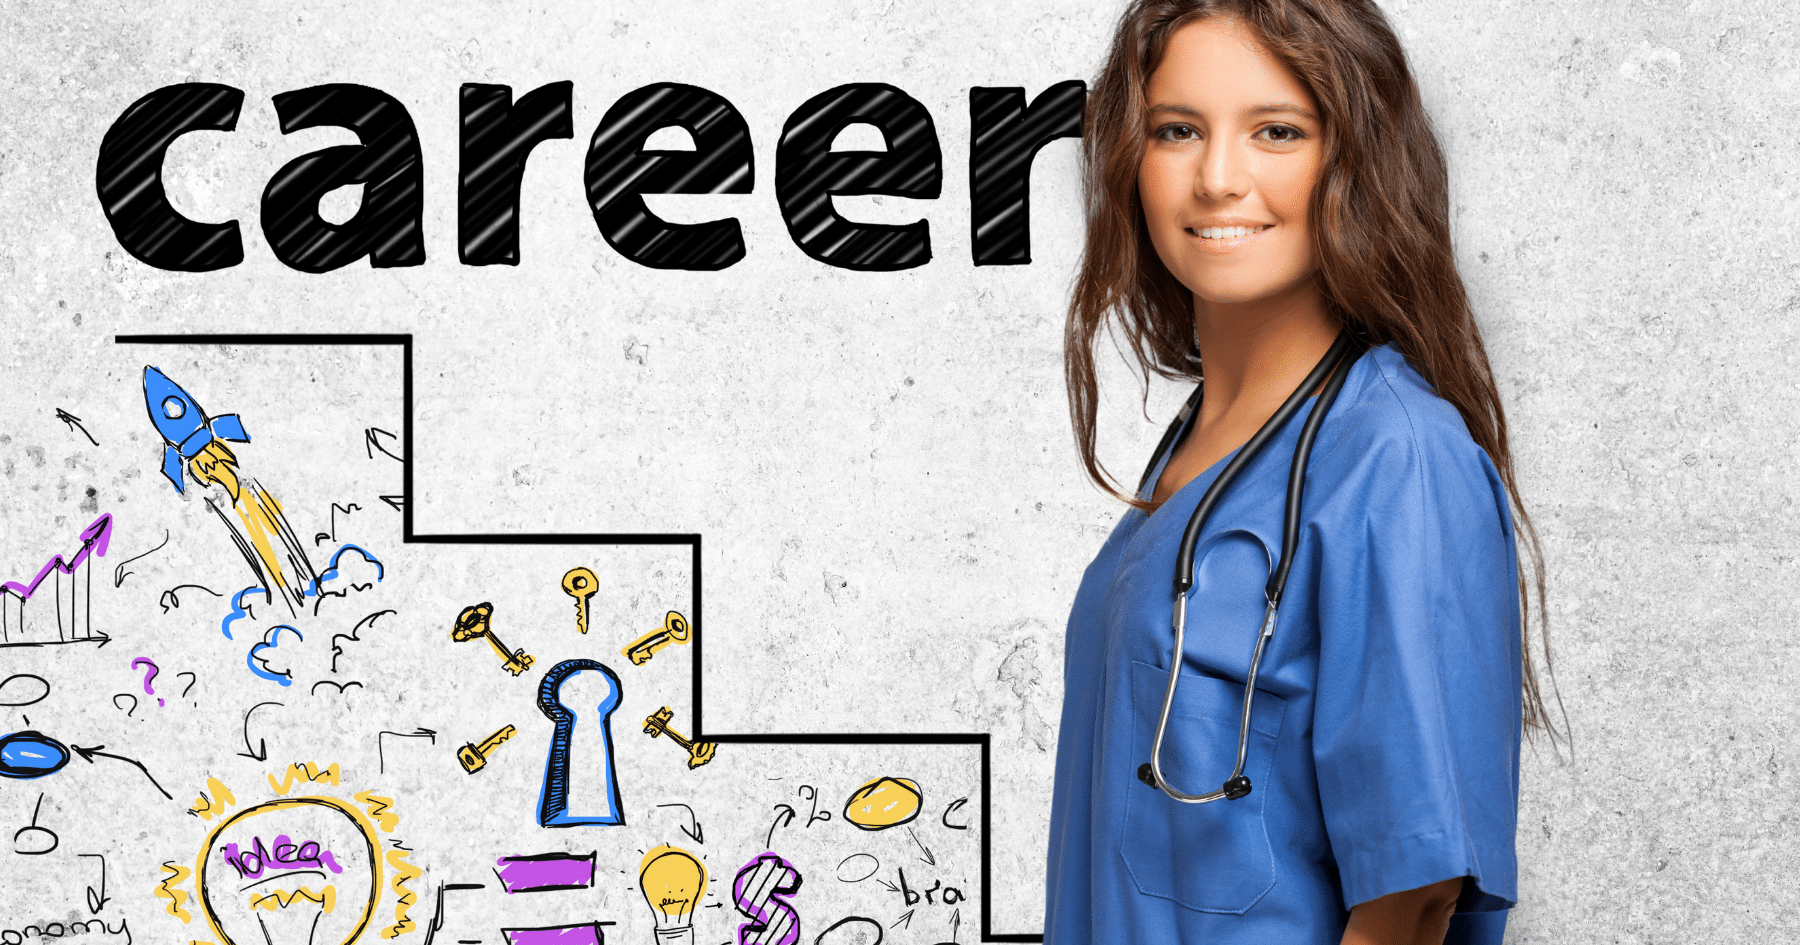 ProMed Staffing Resources helps you with the advancement of your nursing career